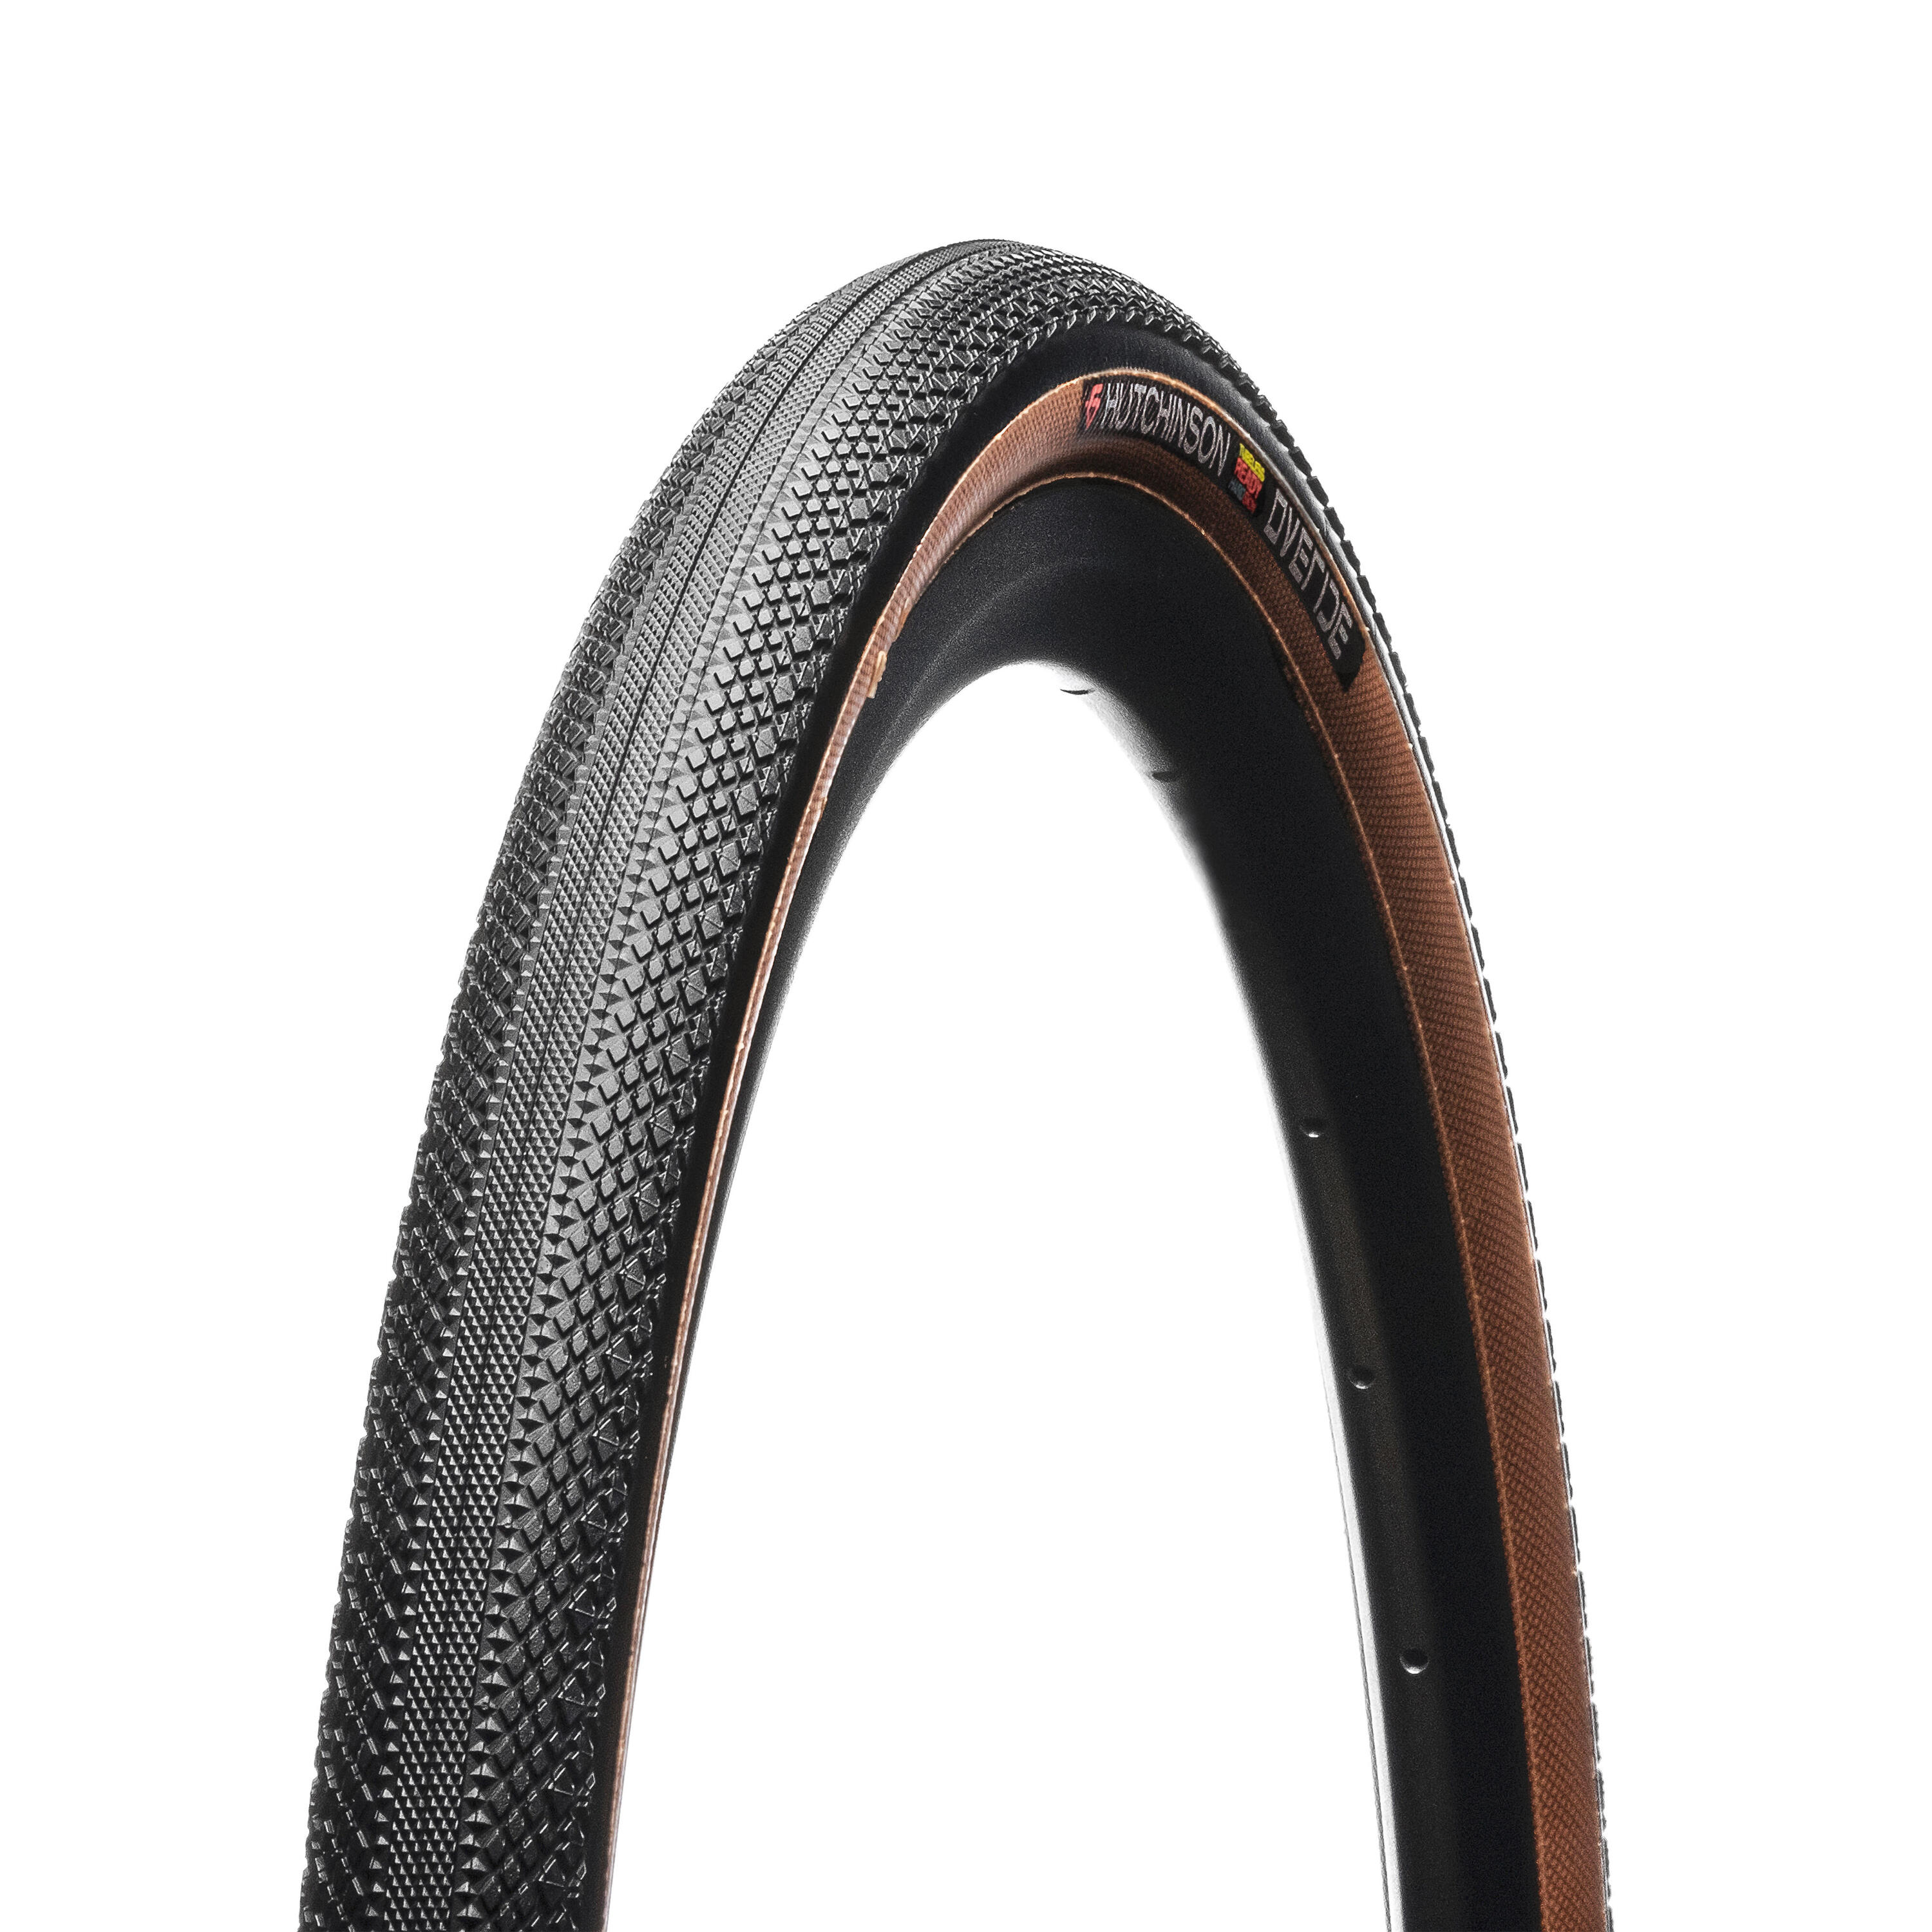 HUTCHINSON 700x40 Hardskin Tubeless Ready Gravel Tyre Overide - Tanwall